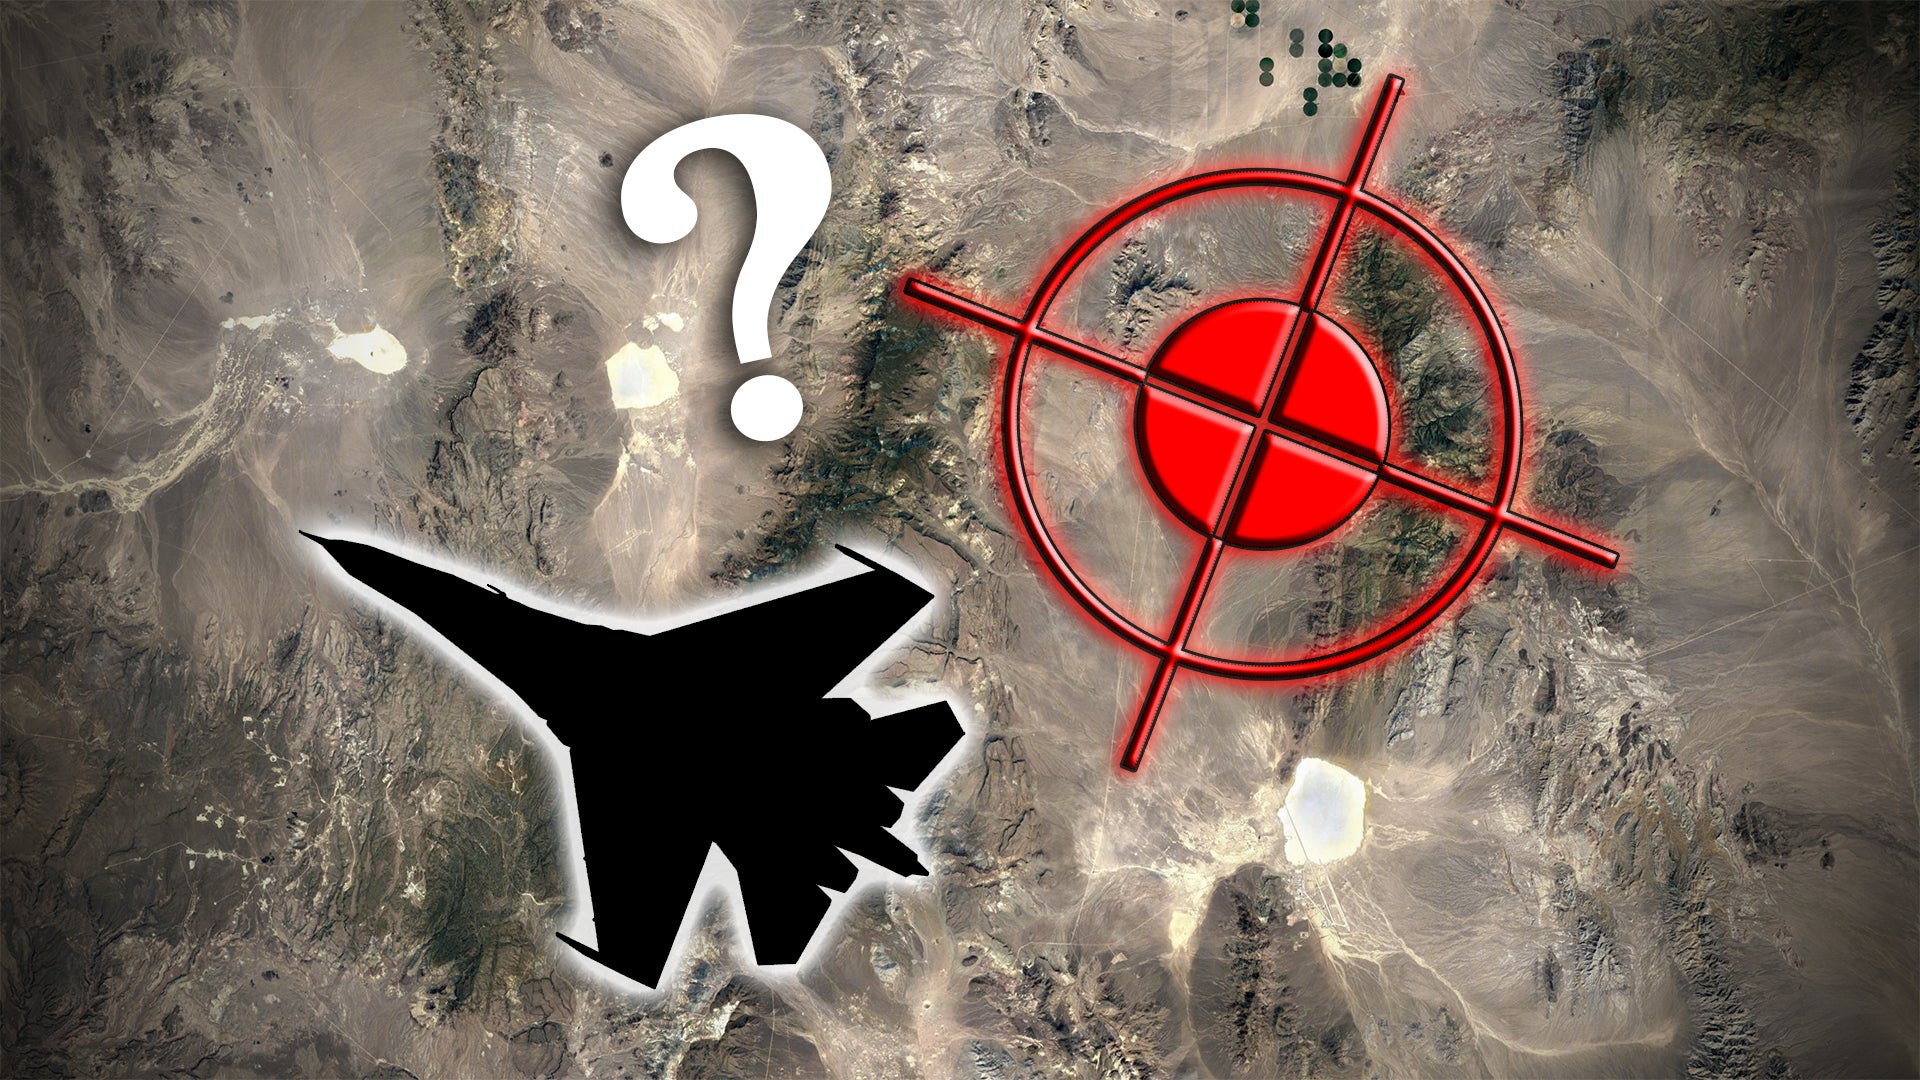 Let’s Talk About The Reports And Theories Circulating Around What Crashed Near Area 51